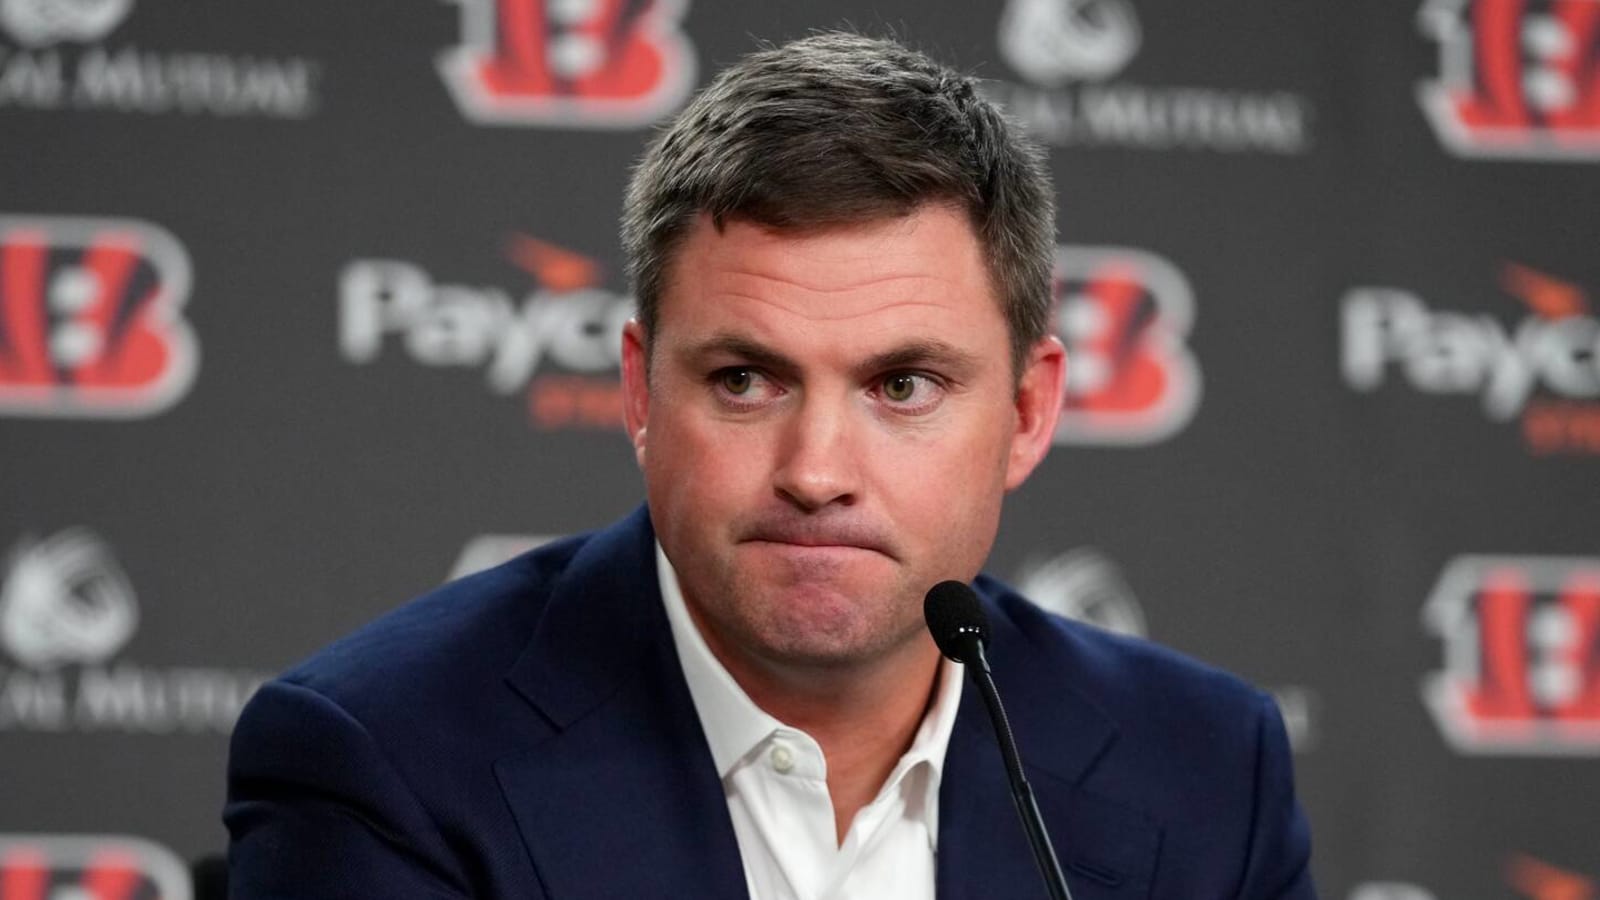 NFL turned down big schedule request from Bengals